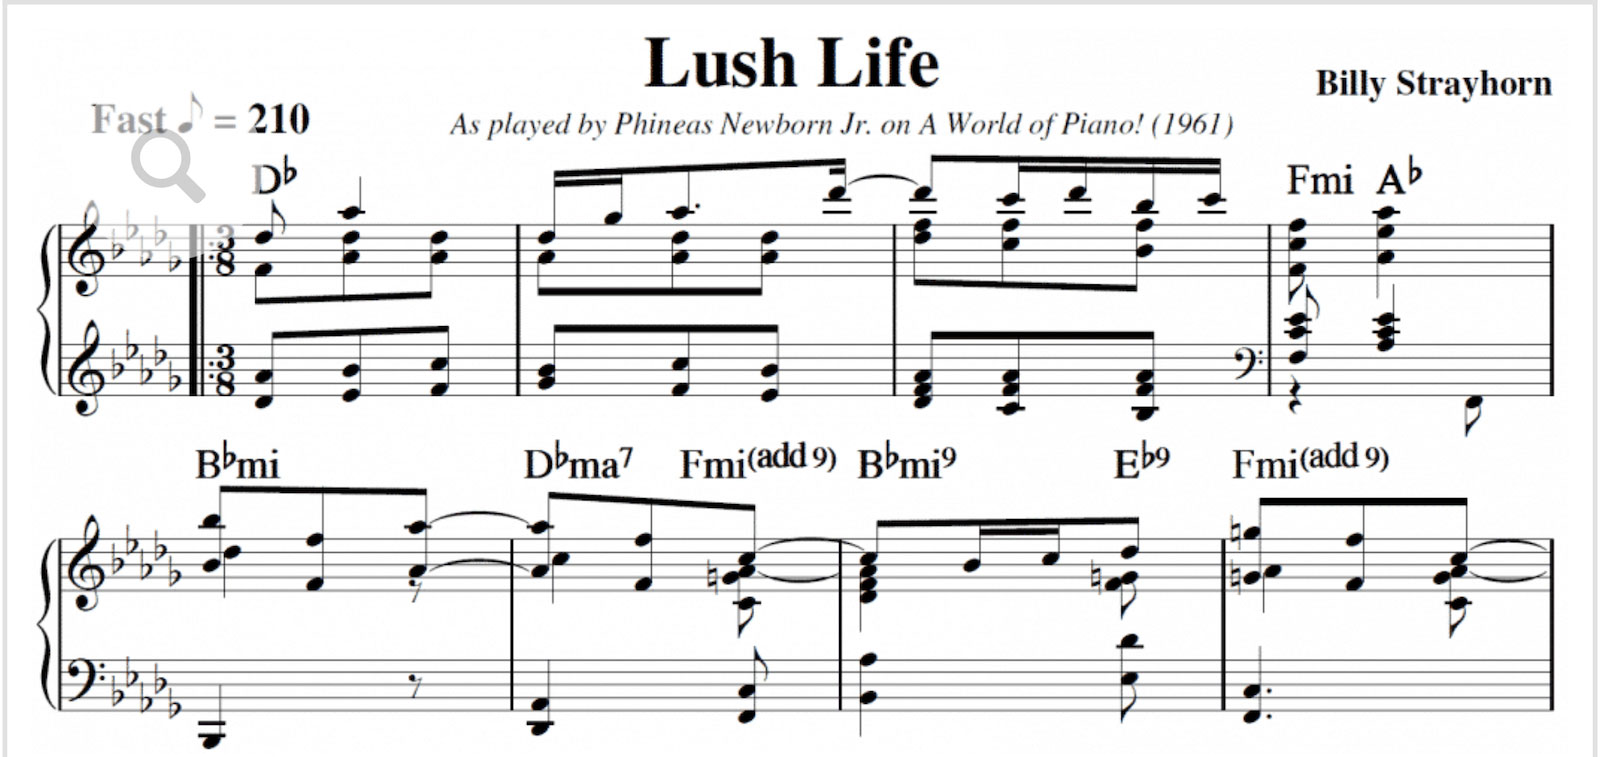 One More Piece? … Yes, Lush Life !